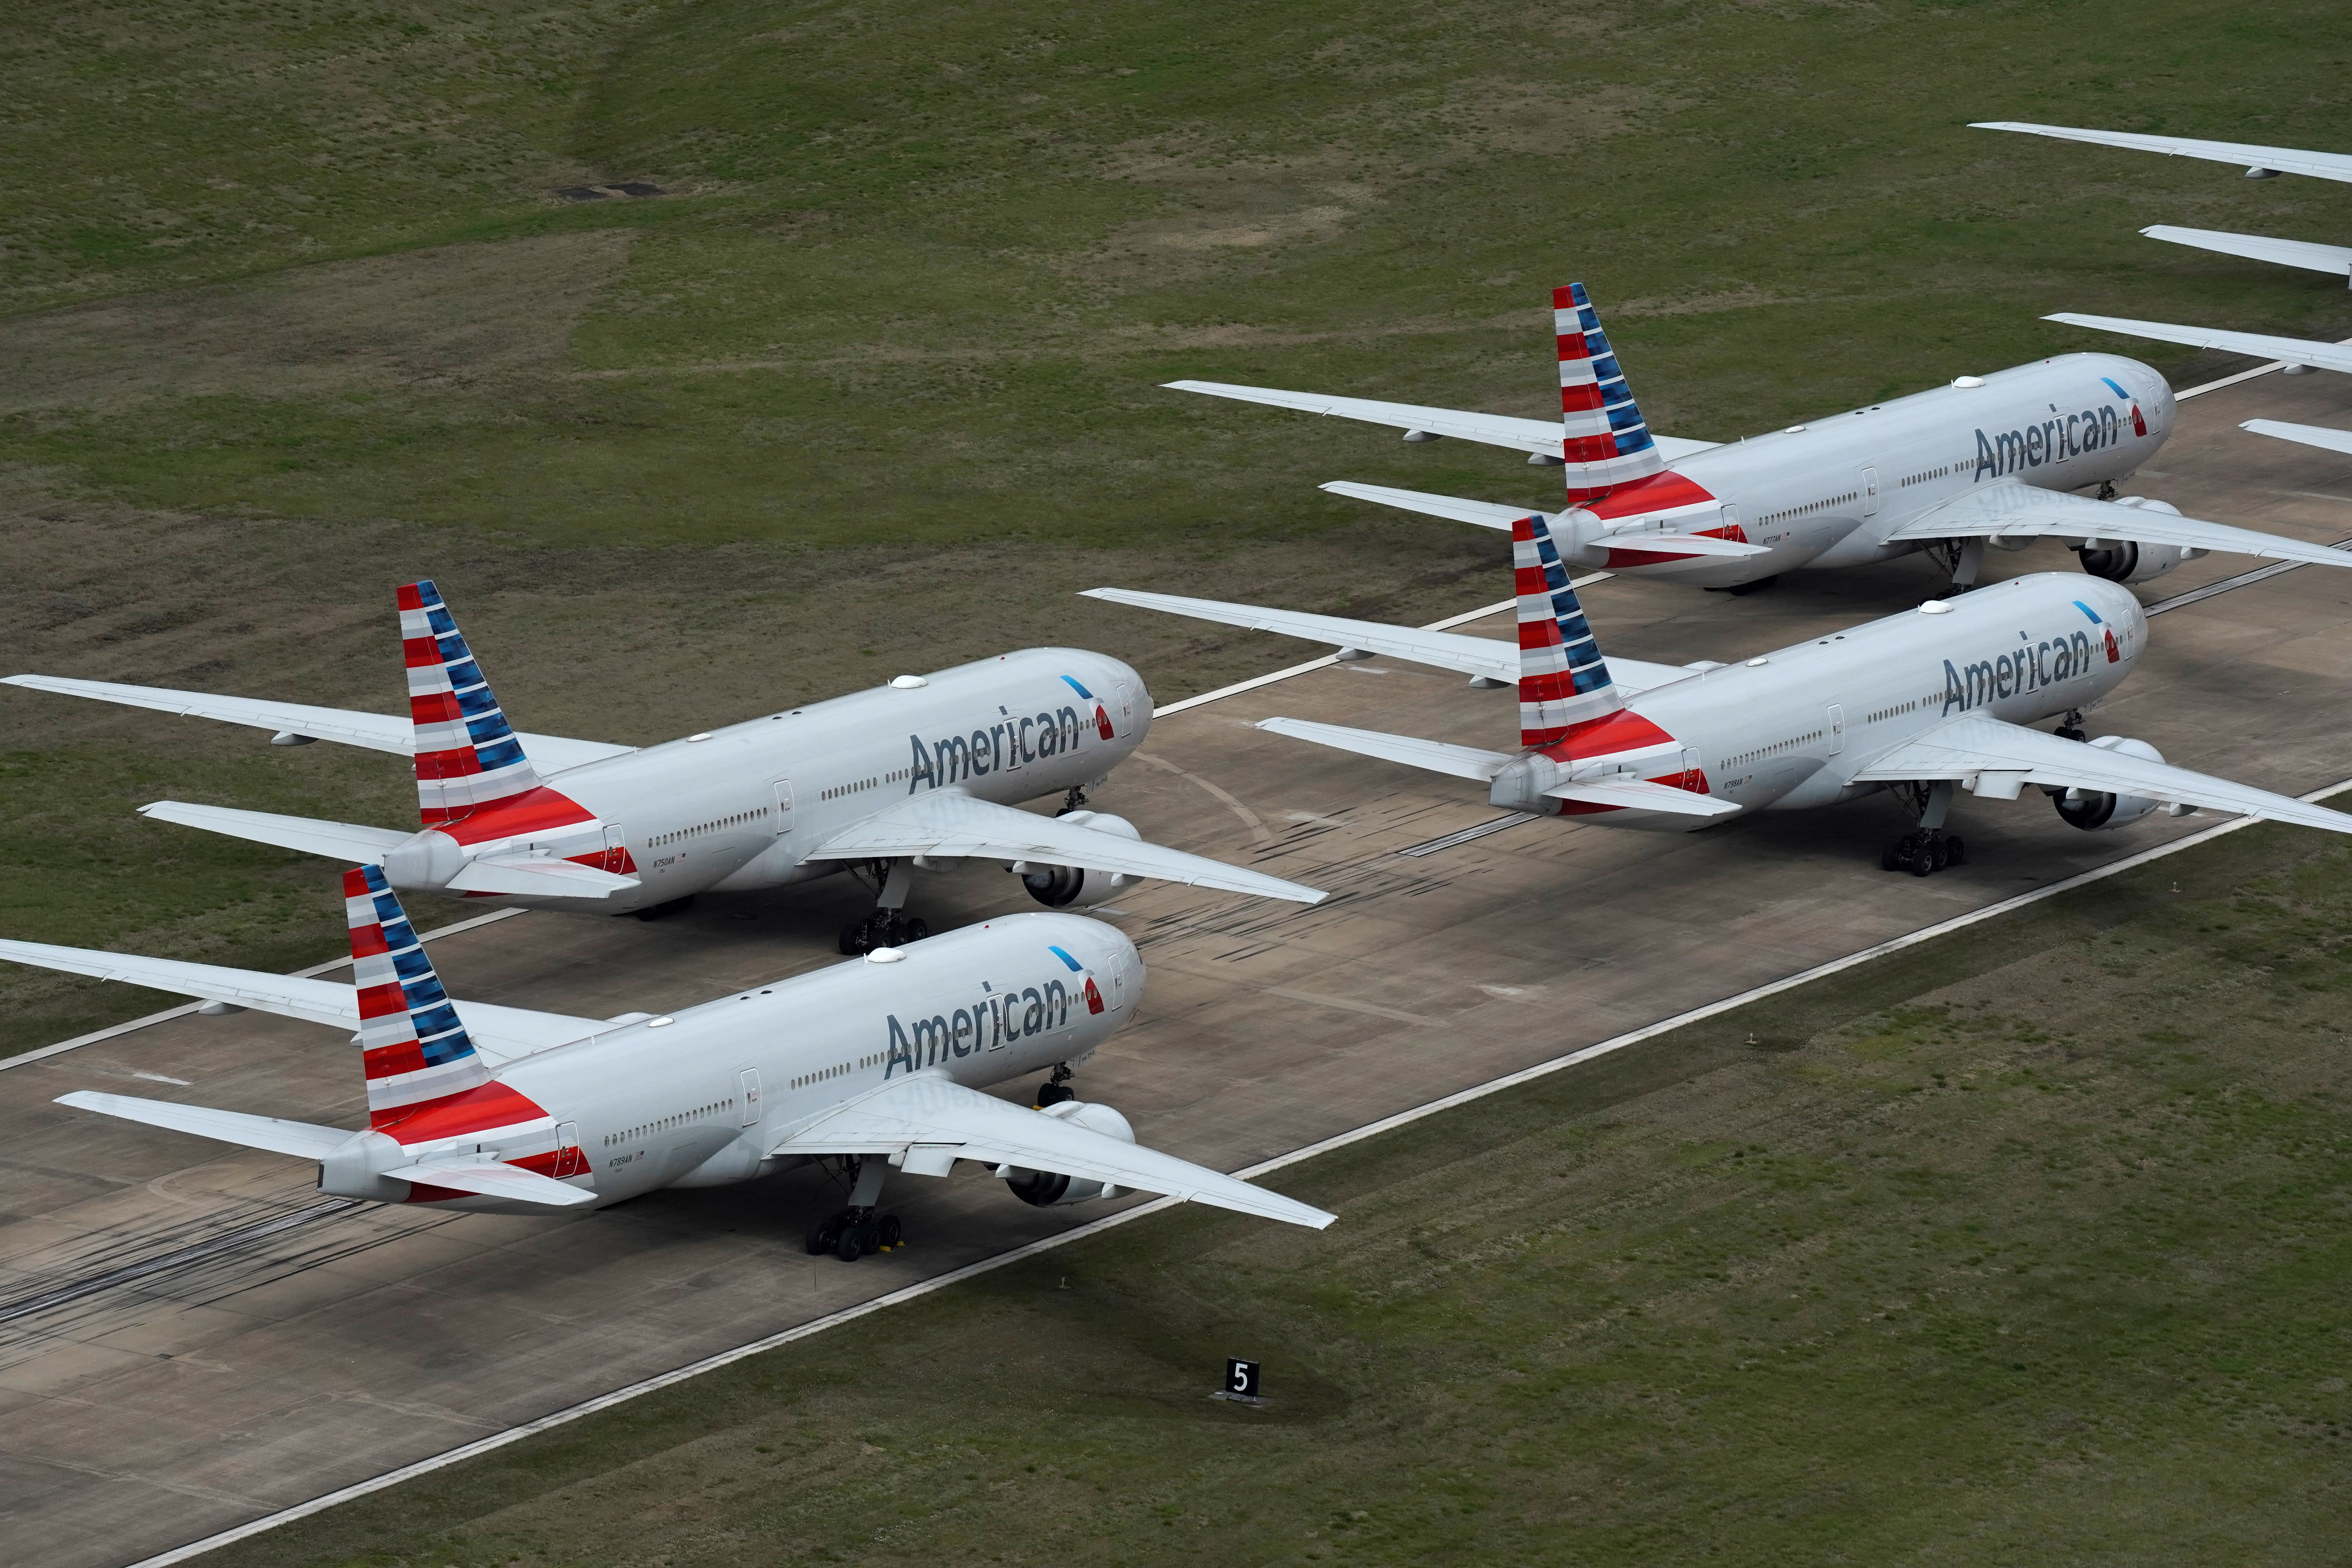 American Airlines passenger planes crowd a runway where they are parked due to flight reductions to slow the spread of coronavirus disease (COVID-19), at Tulsa International Airport in Tulsa